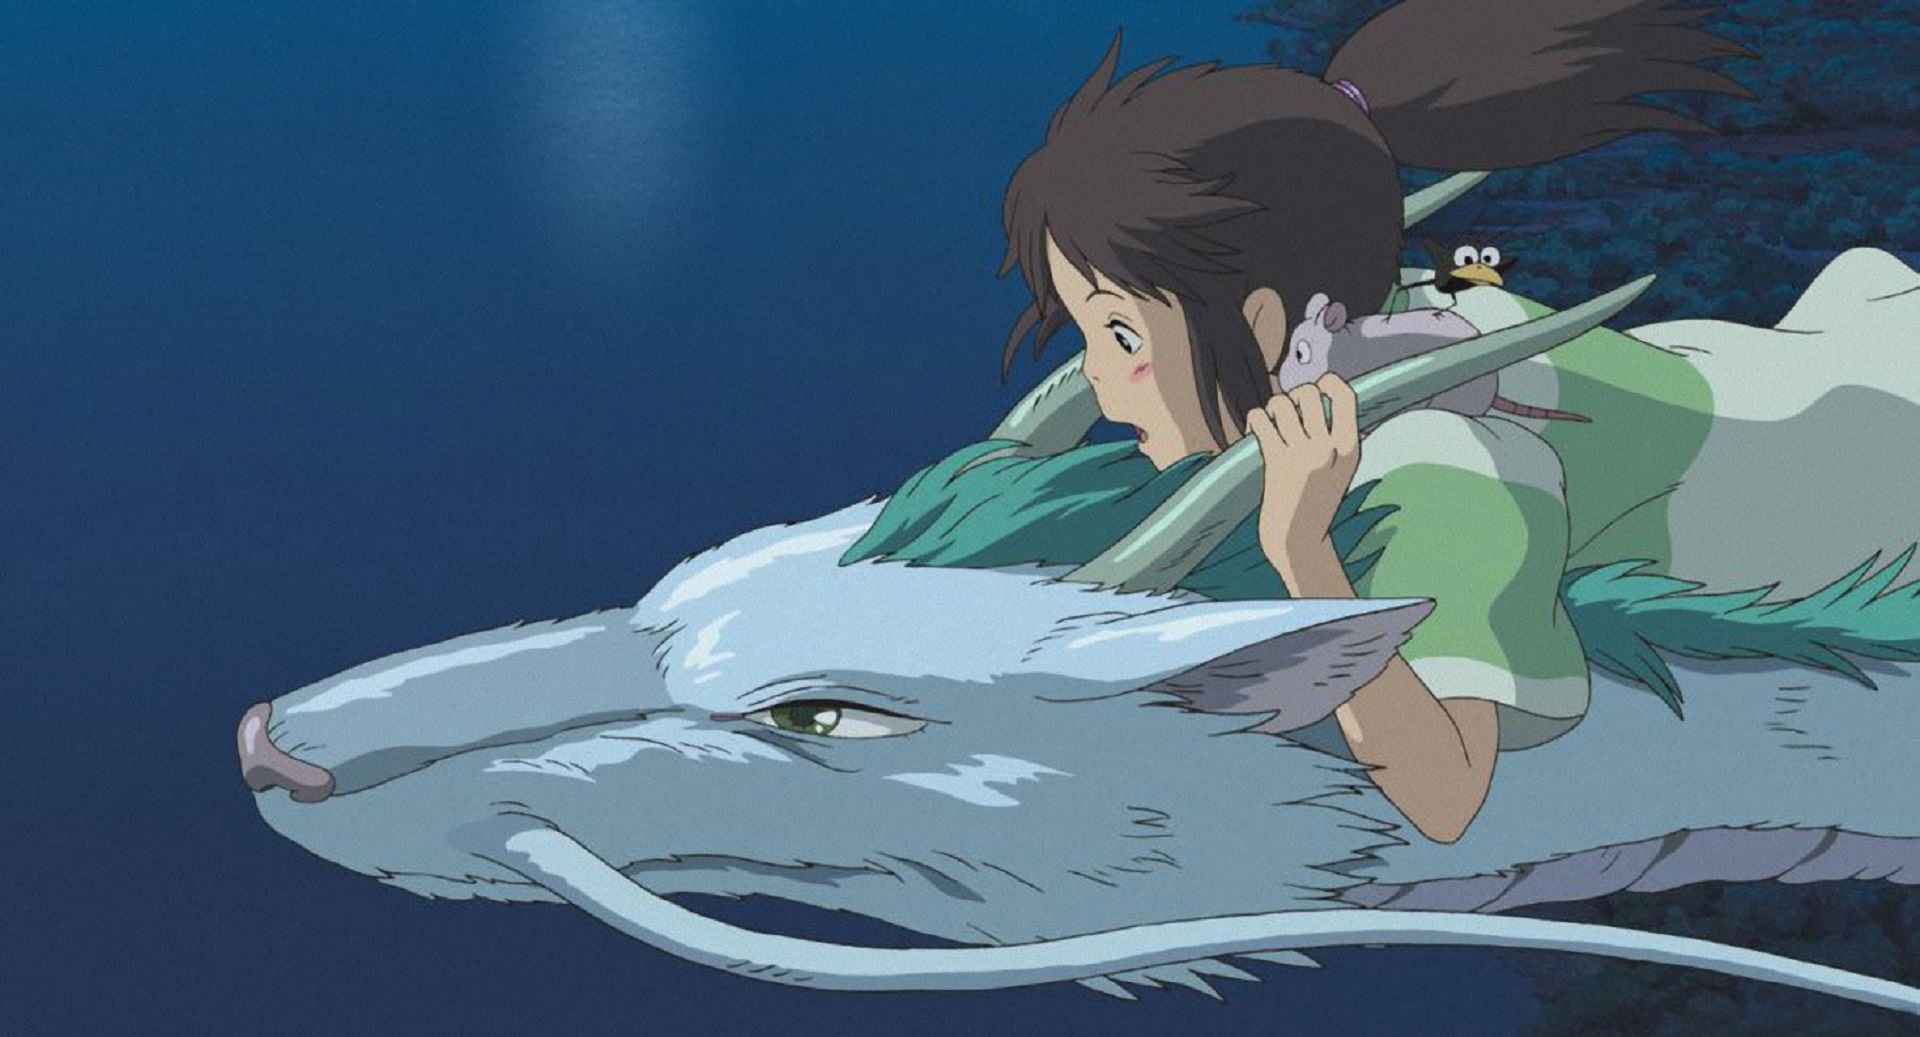 Cartoon "Spirited away" in an article about cool animated films